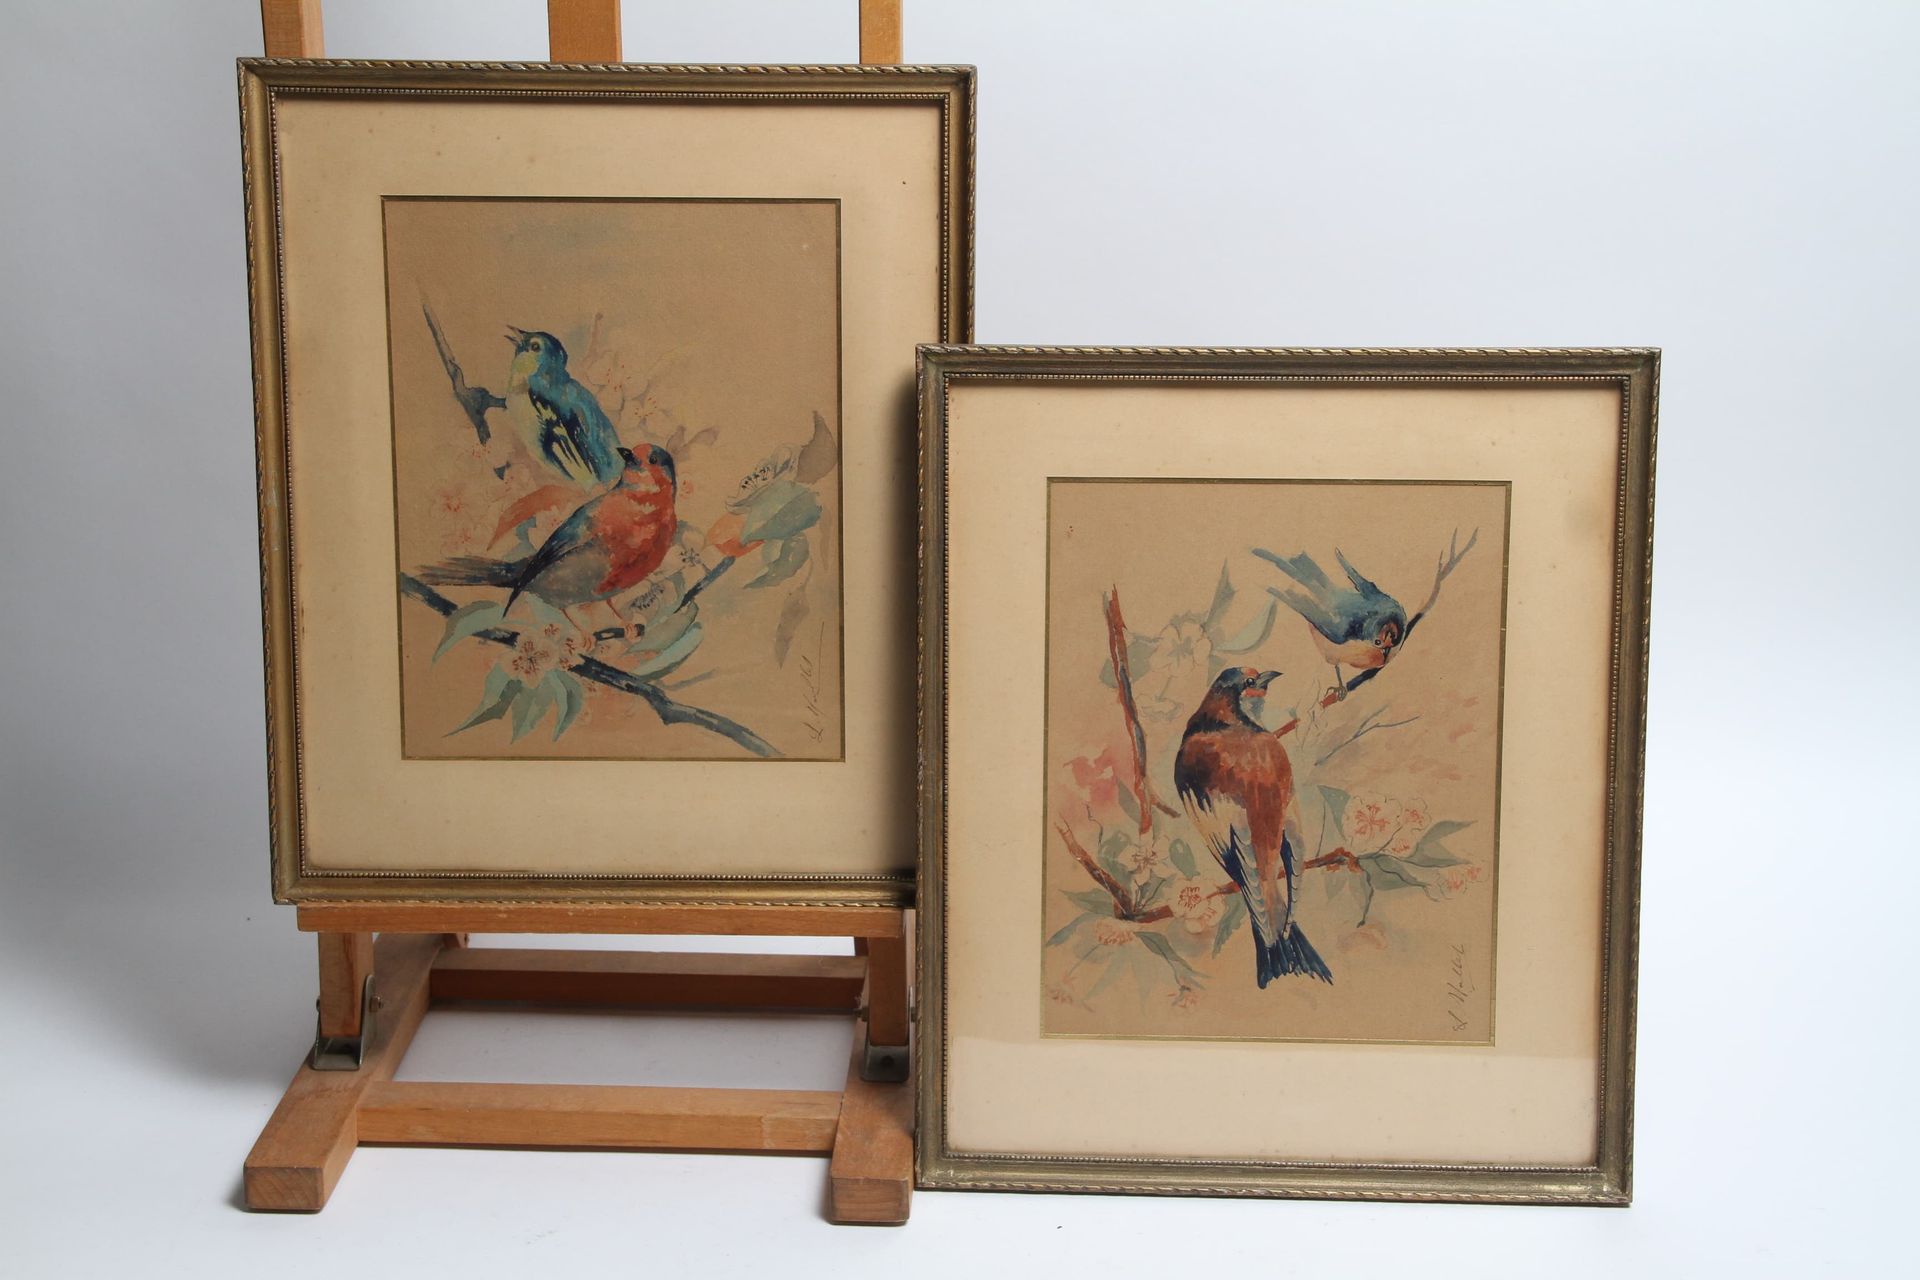 Null L. MALLET, TWO AQUARELLES SIGNED AT THE BOTTOM RIGHT "LES OISEAUX" 21 x 27 &hellip;